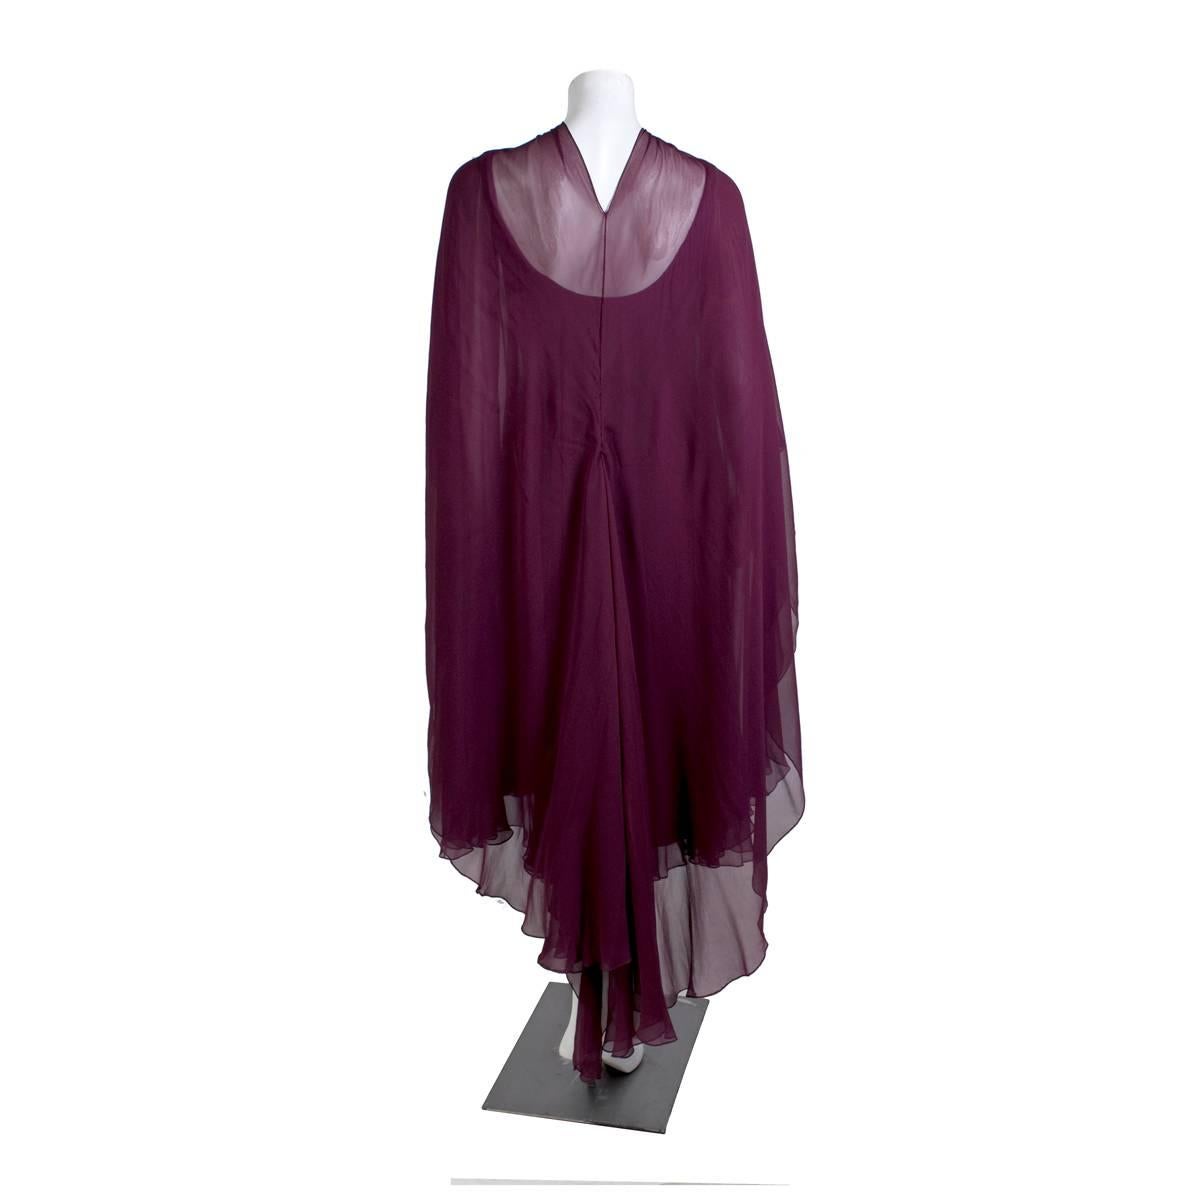 Dress by Halston circa 1970s
Scoop neck dress with sheer sleeves and layers of goddess draped purple silk 
Includes a matching sheer silk cover that can tie at neck as a cape
Condition:  Excellent vintage condition
Size/Measurements:
36